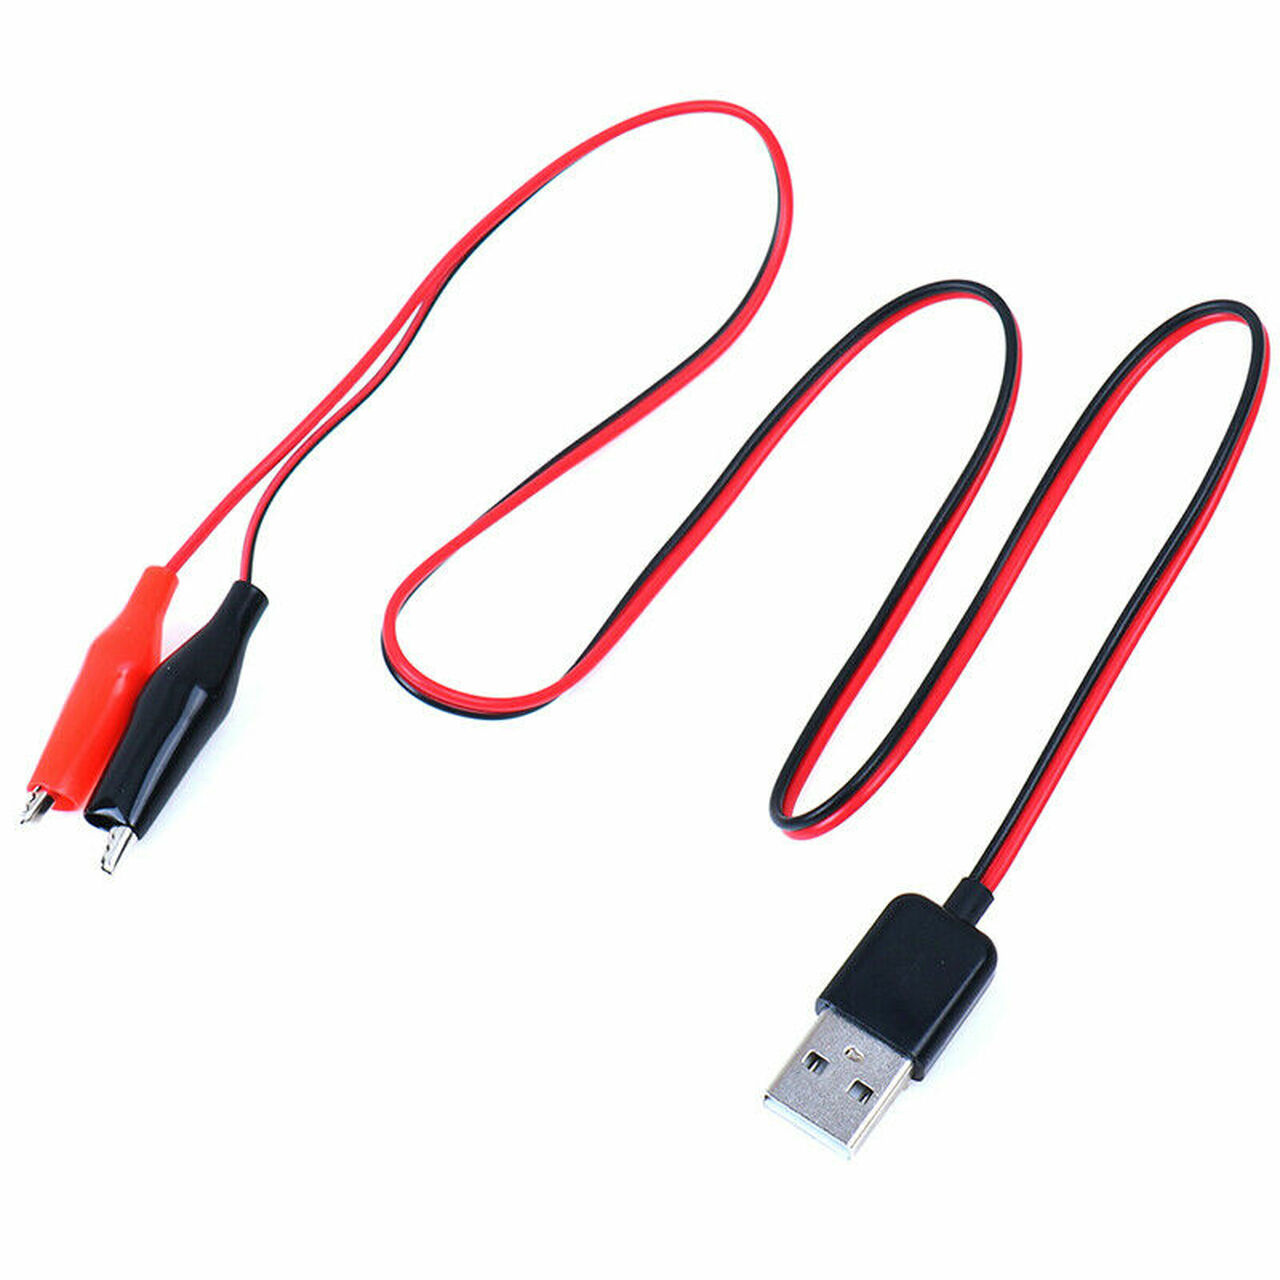 Alligator Test Clips Clamp to USB Male Connector - 60cm